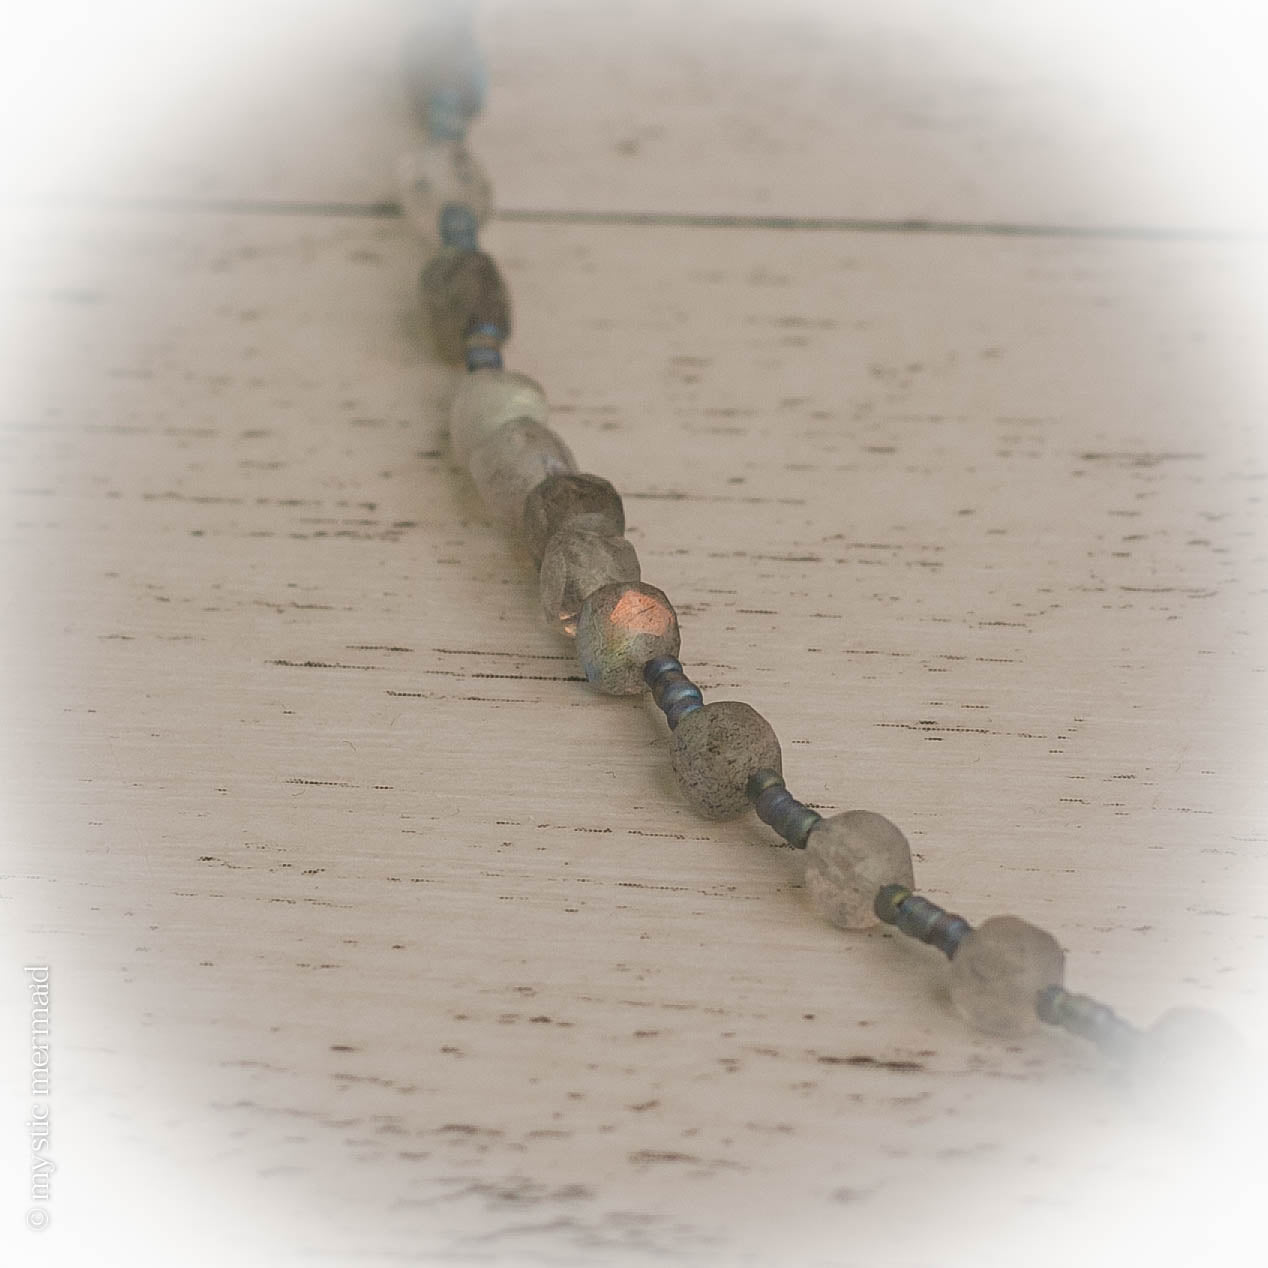 Labradorite Square Faceted Crystal Necklace